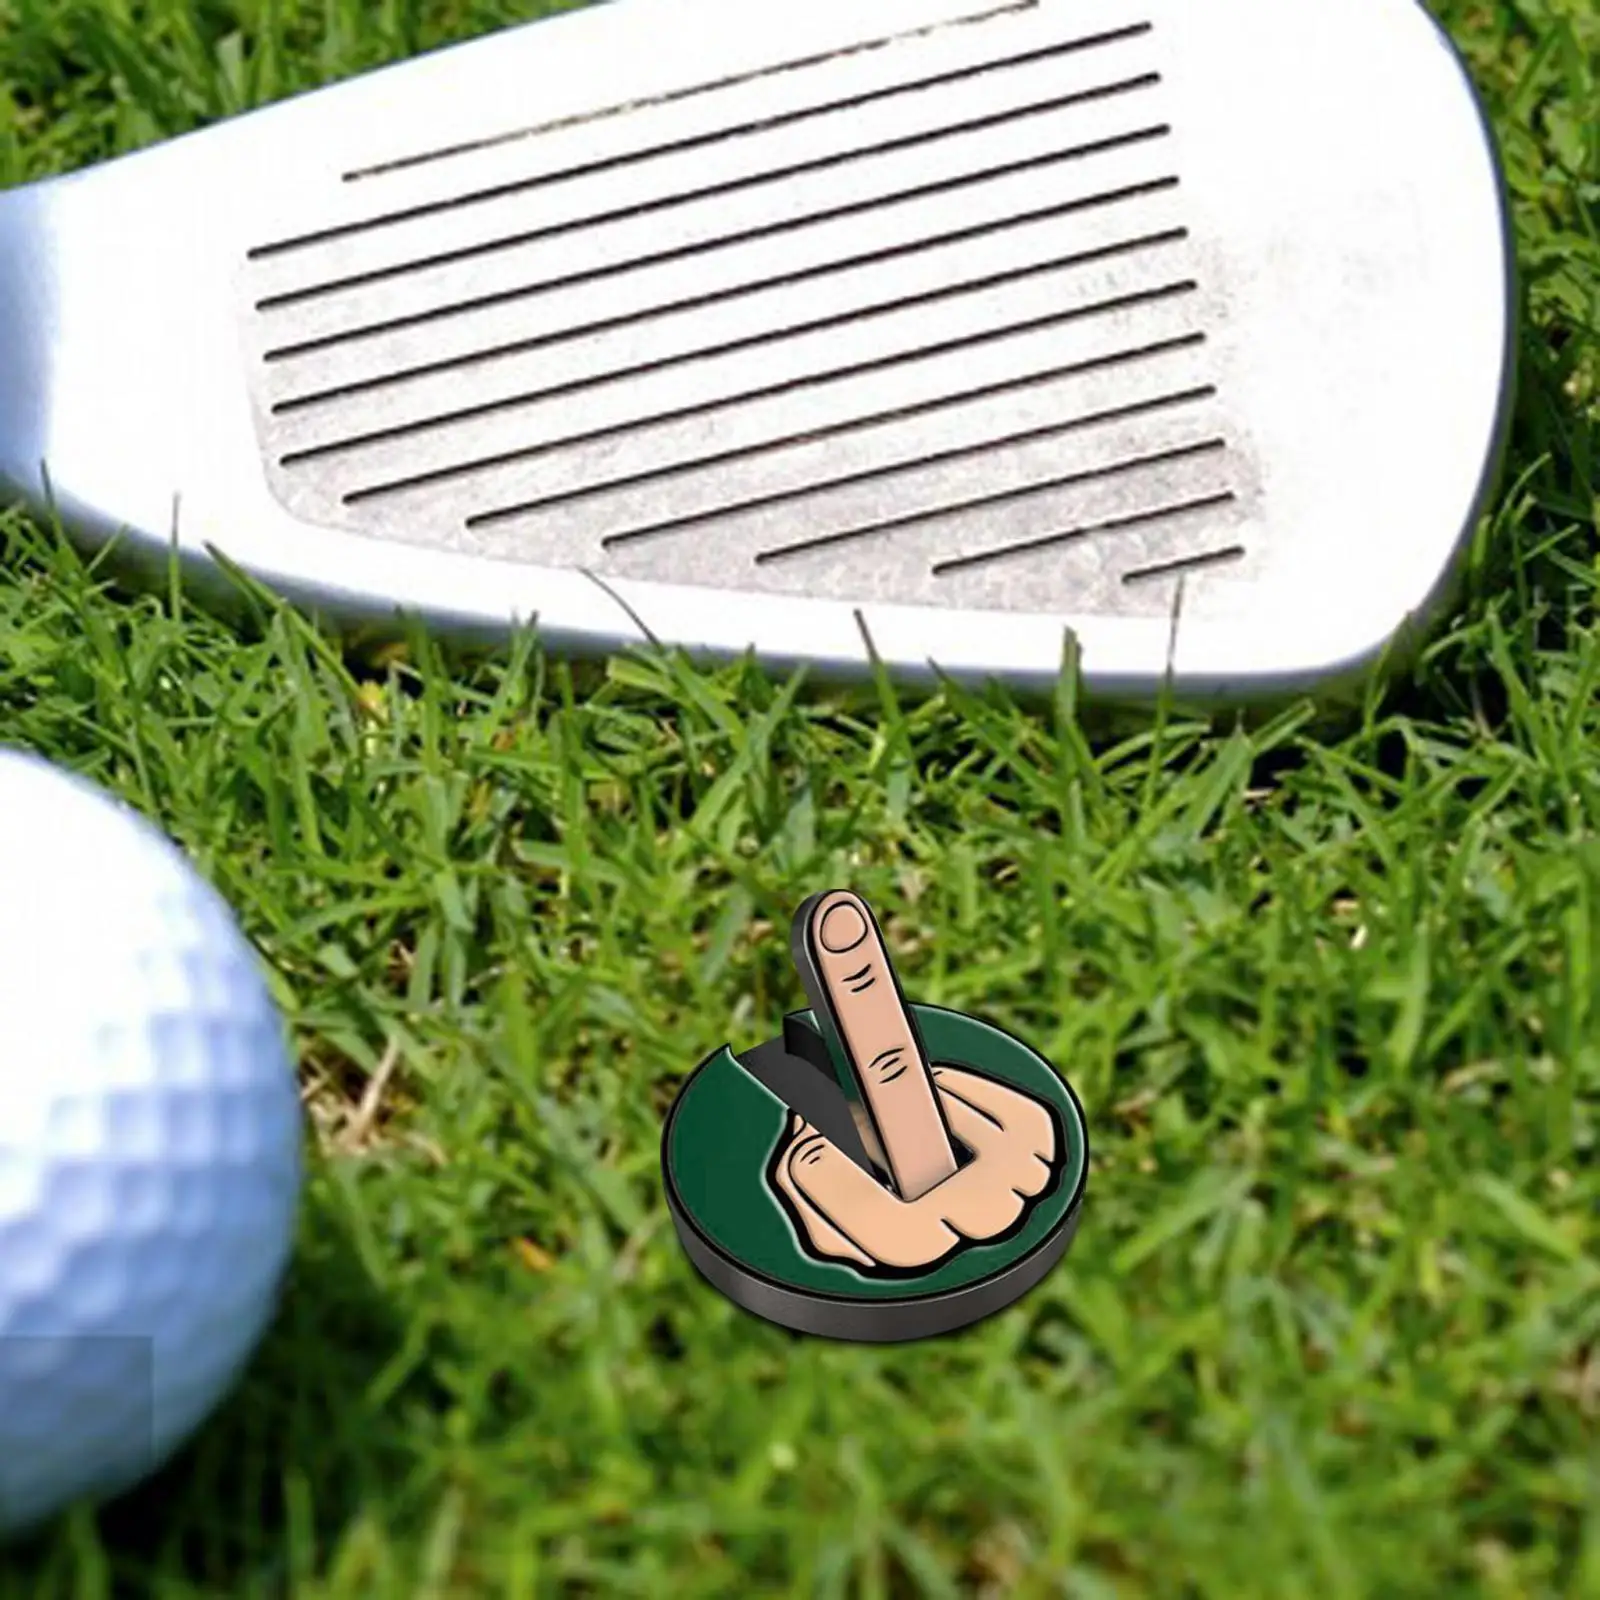 Middle Finger Theme Golf Ball Marker Lovers Iron Gifts Diameter 1inch Golfer